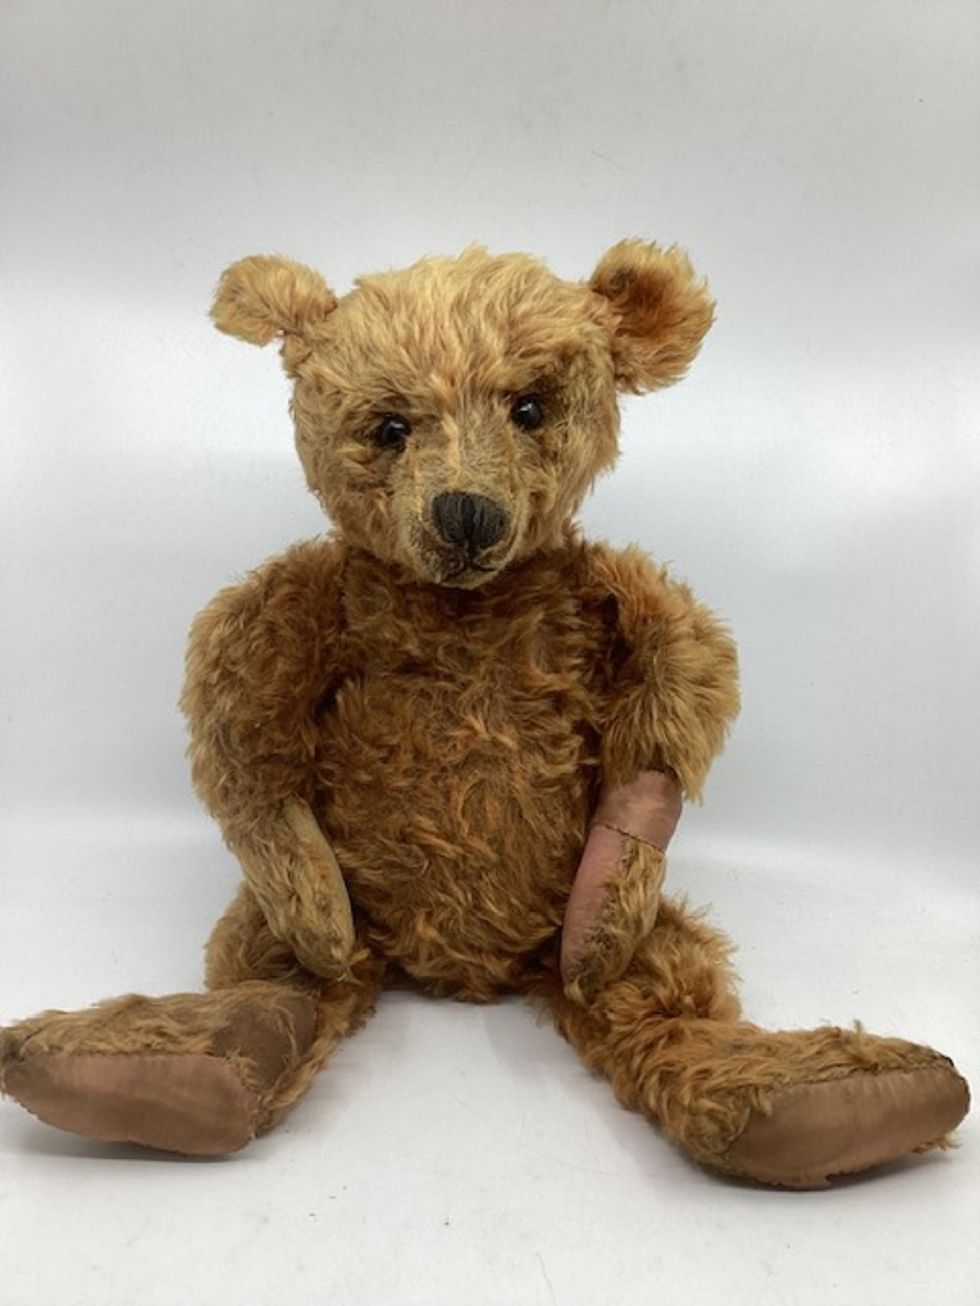 118-year-old teddy bear bought at car boot sale expected to sell for thousands